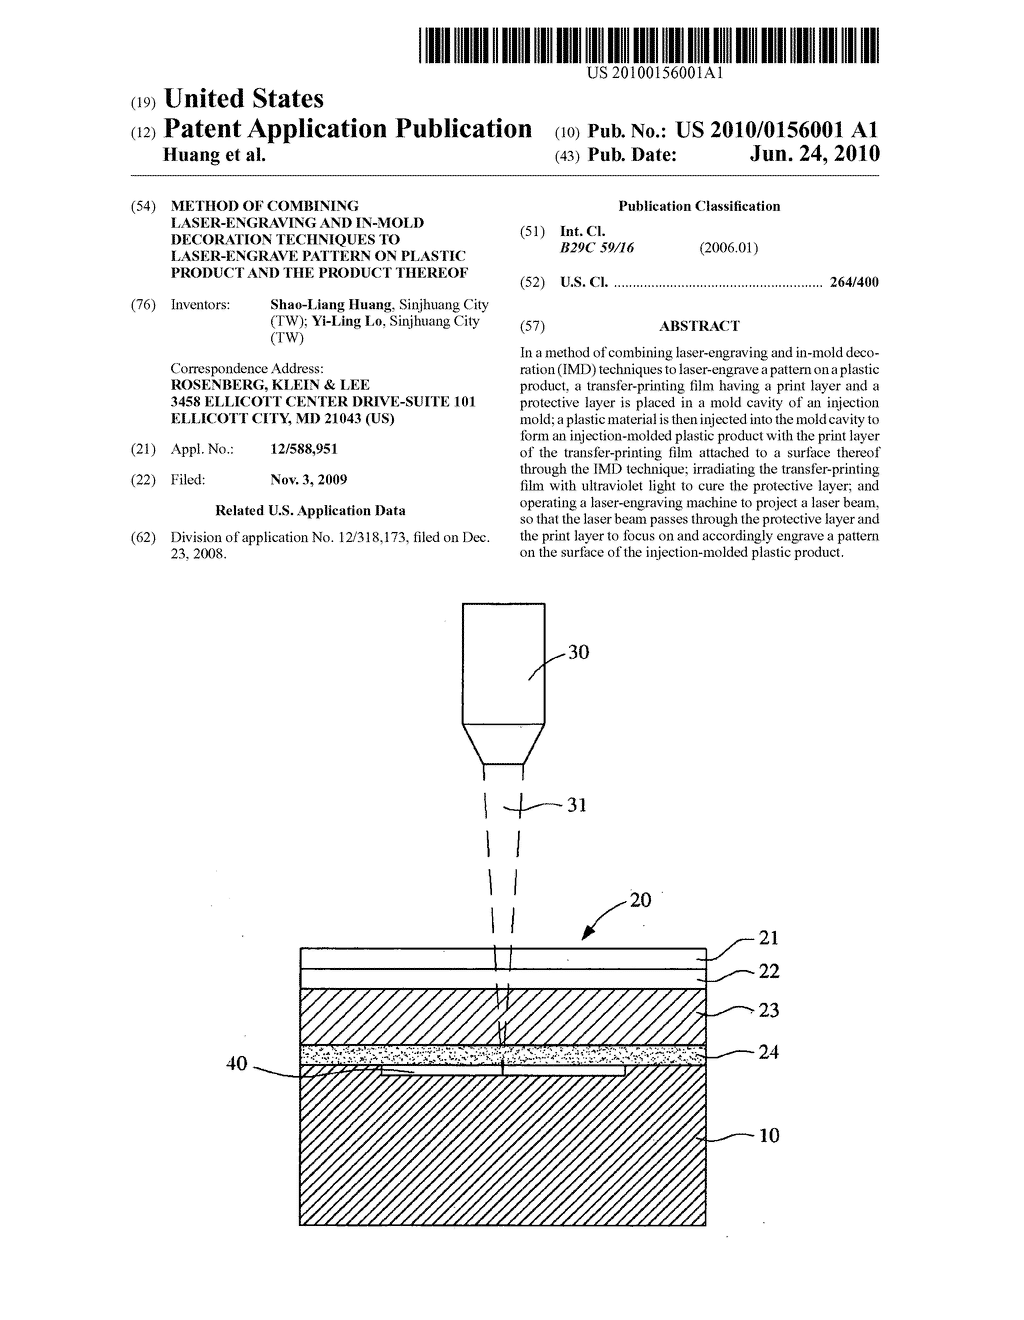 Method of combining laser-engraving and in-mold decoration techniques to laser-engrave pattern on plastic product and the product thereof - diagram, schematic, and image 01